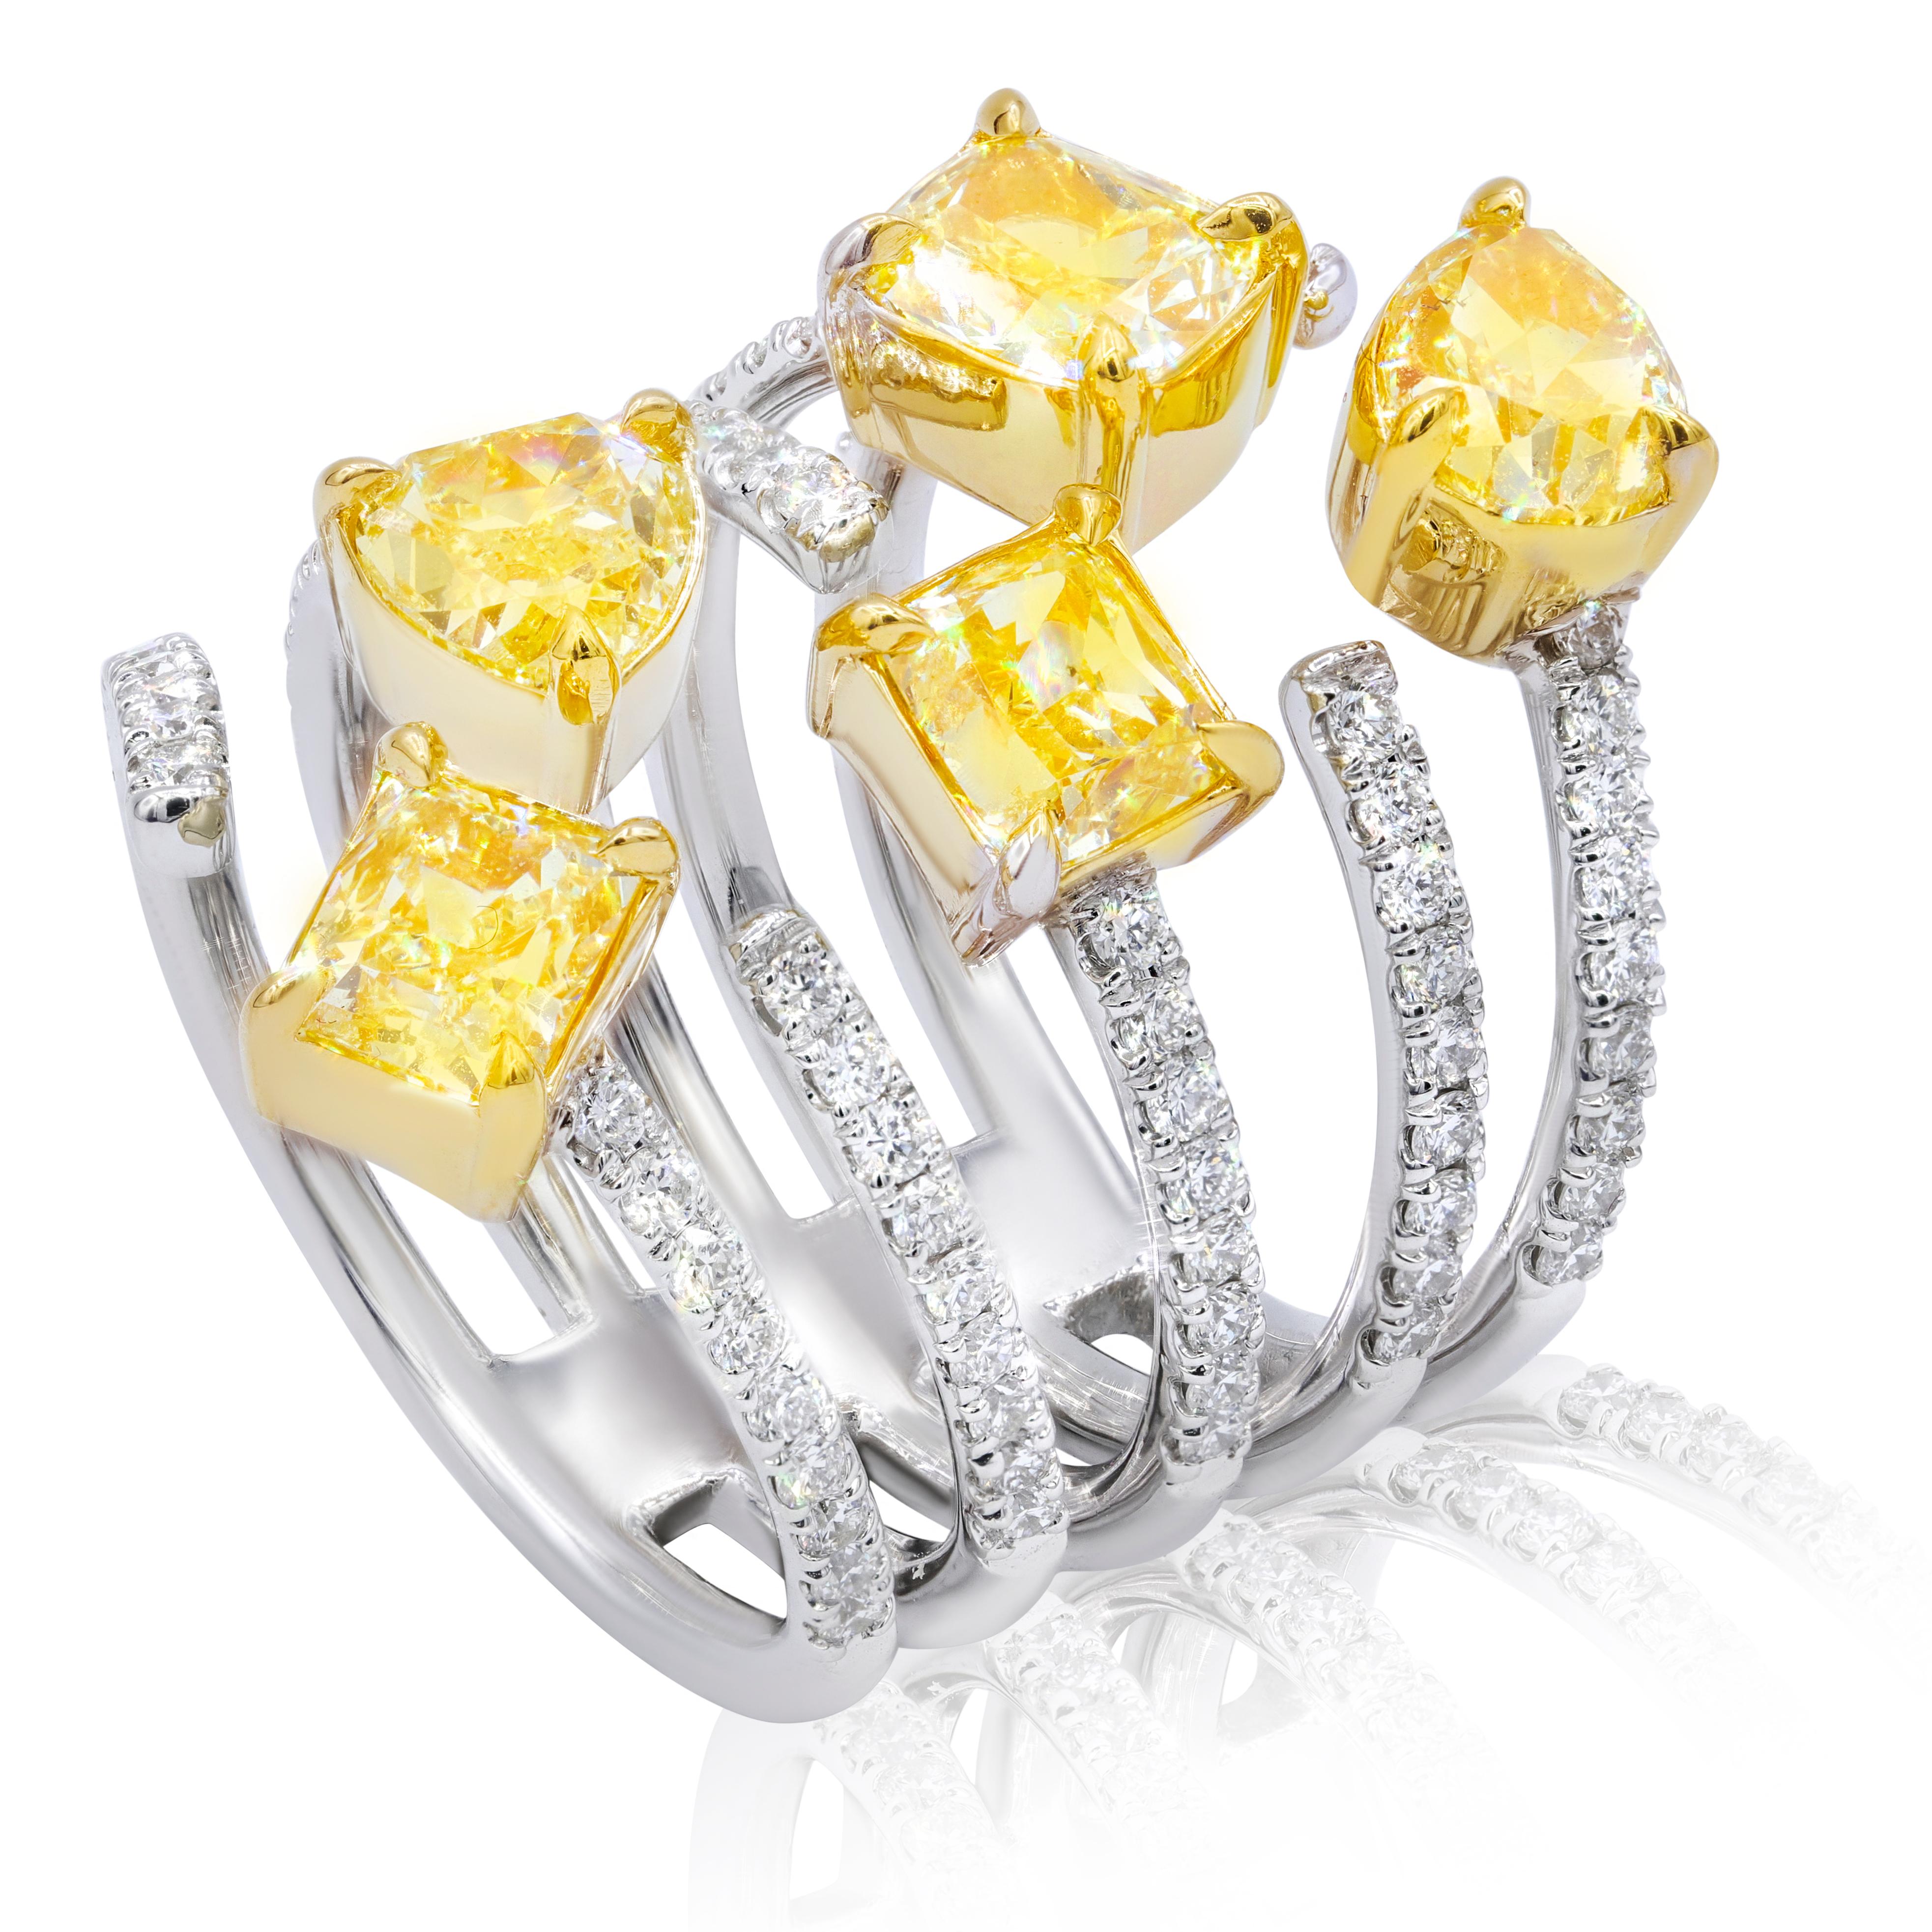 18KT two tone multi shaped fancy yellow diamond ring with 3.95 carats of five yellow diamonds and 0.90 carats micro pave diamonds.
Ring size: 6.5
Can be resized to any finger size.

This product comes with a certificate of appraisal
This product